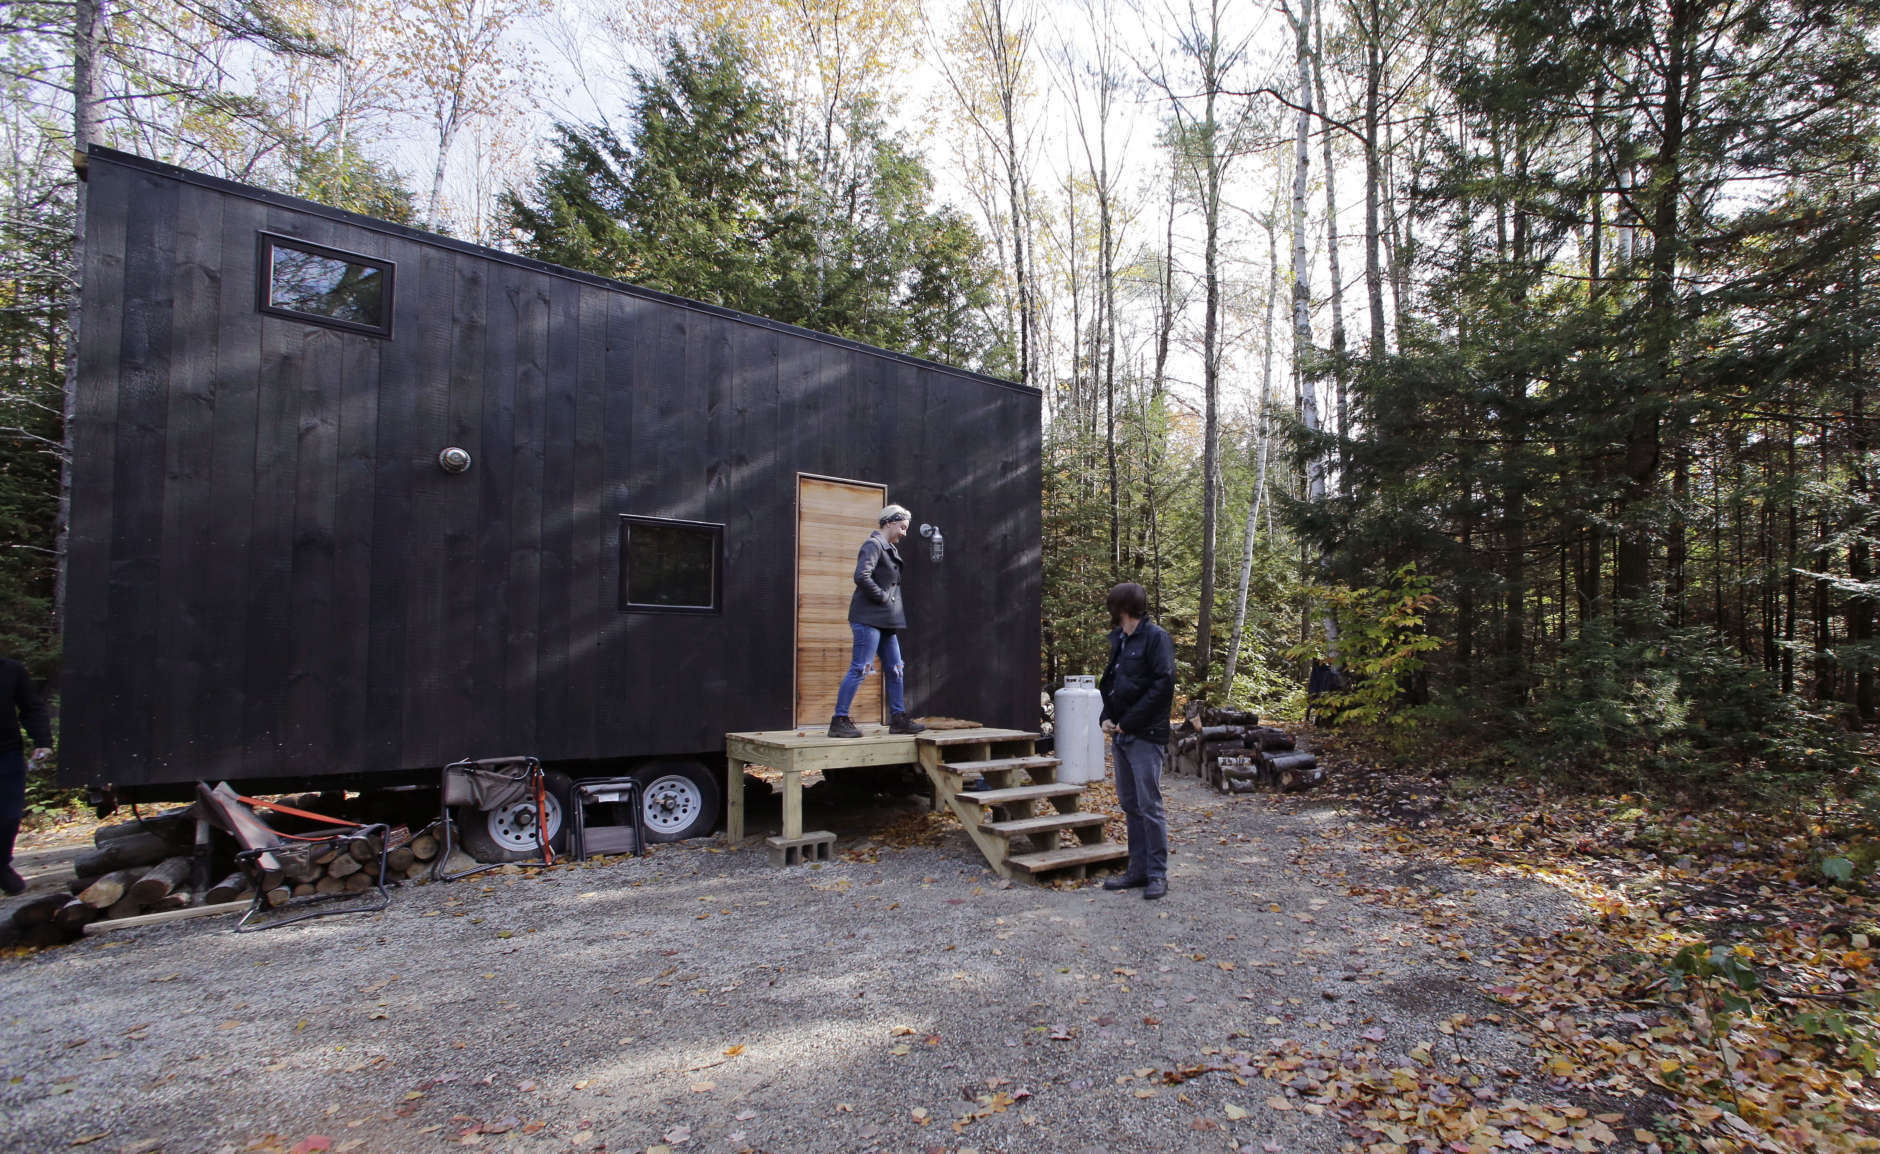 In this Tuesday, Oct. 20, 2015 photo, Hilary Lentz, of Pittsburgh, Pa., and her husband Shane leave the tiny house which they rented for a weekend in Croydon, N.H. As the tiny house phenomenon sweeps the nation, Harvard's Millennial Housing Lab thinks a tryout is in order for people toying with radically downsizing their lives. Its new "Getaway" project gives the curious an opportunity to spend a night or two in one of three tiny houses and get a real feel for the lifestyle before taking the plunge. (AP Photo/Charles Krupa)